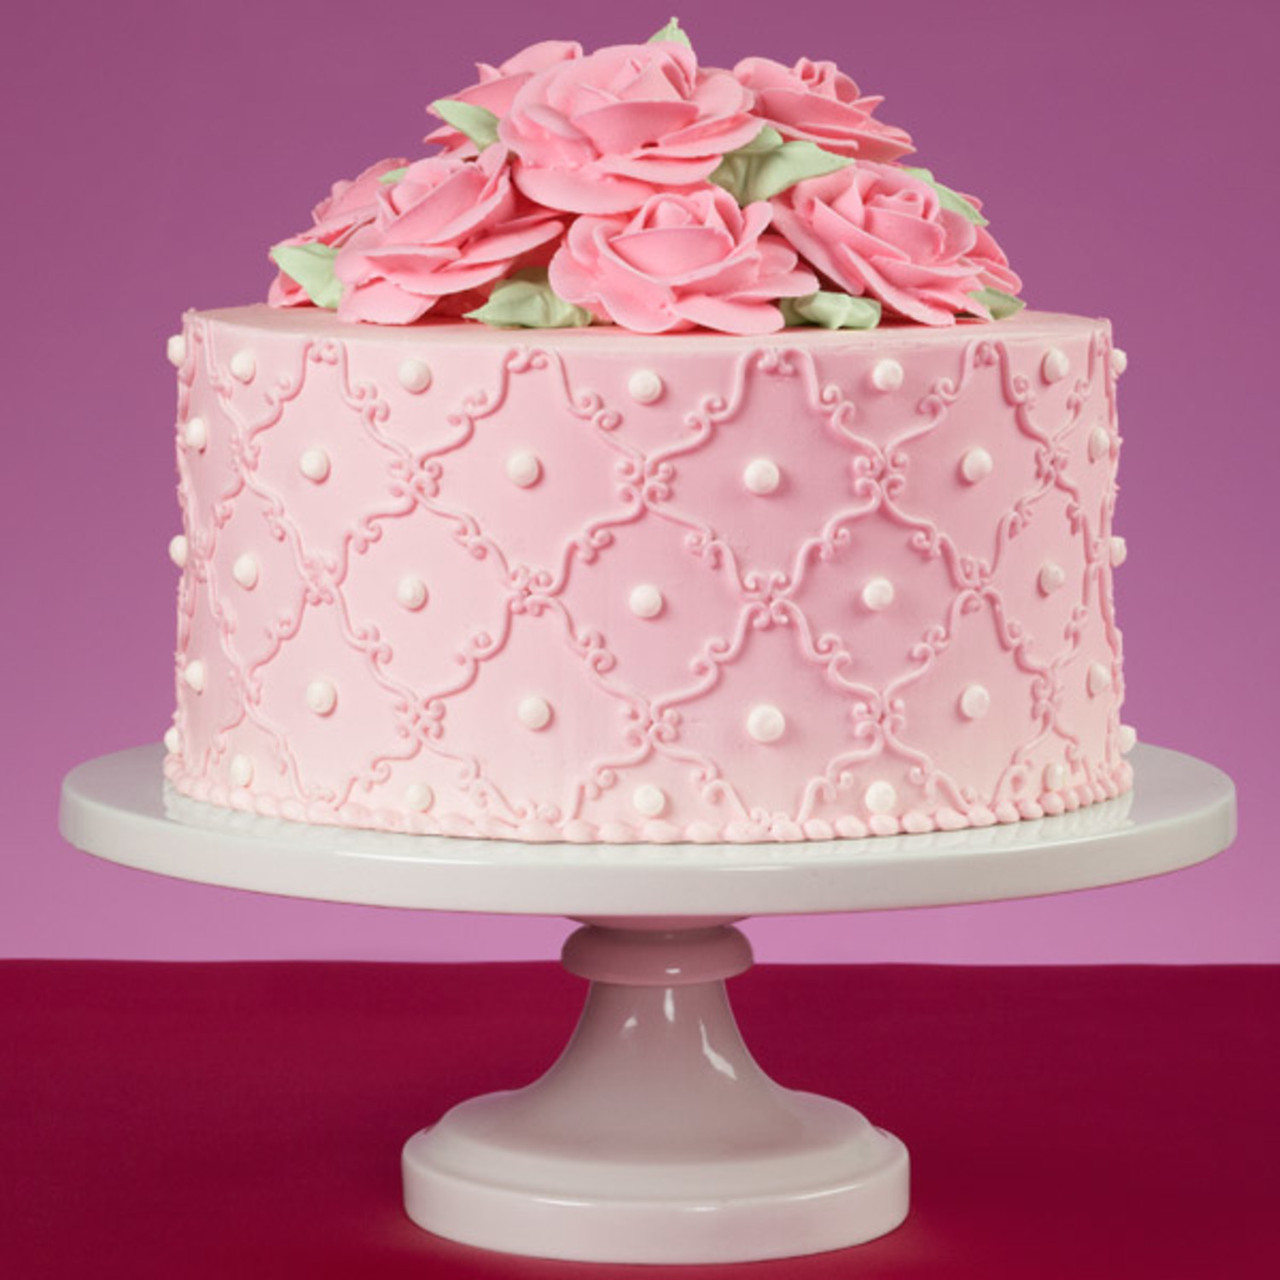 Premium Photo | A pink birthday cake with pink icing and a number 5 candle  on top